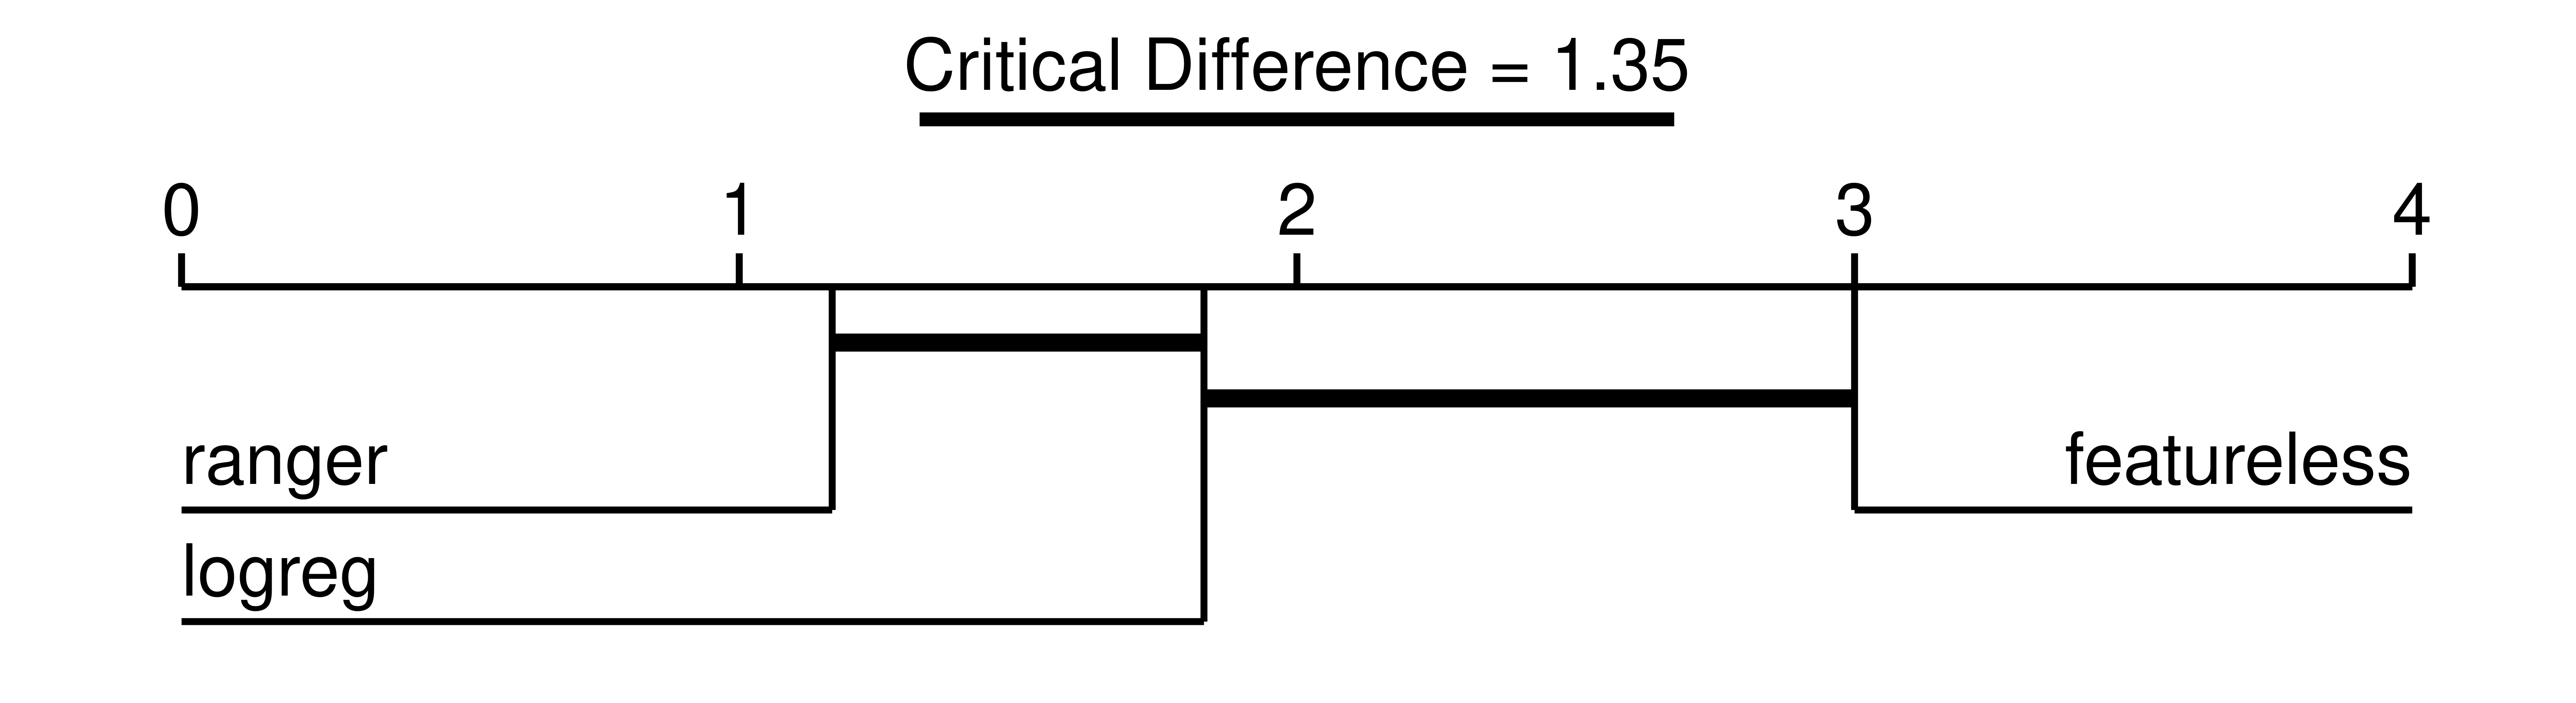 Figure shows a one-axis diagram ranging from 0 to 4, above the diagram is a thick black line with text 'Critical Difference = 1.35'. Diagram shows 'ranger' on the far left just to the right of '1', then 'logreg' just to the left of '2', then 'featureless' just under '3'. There is a thick, black line connecting 'ranger' and 'logreg', as well as a thick, black line connecting 'logreg' and 'featureless'.